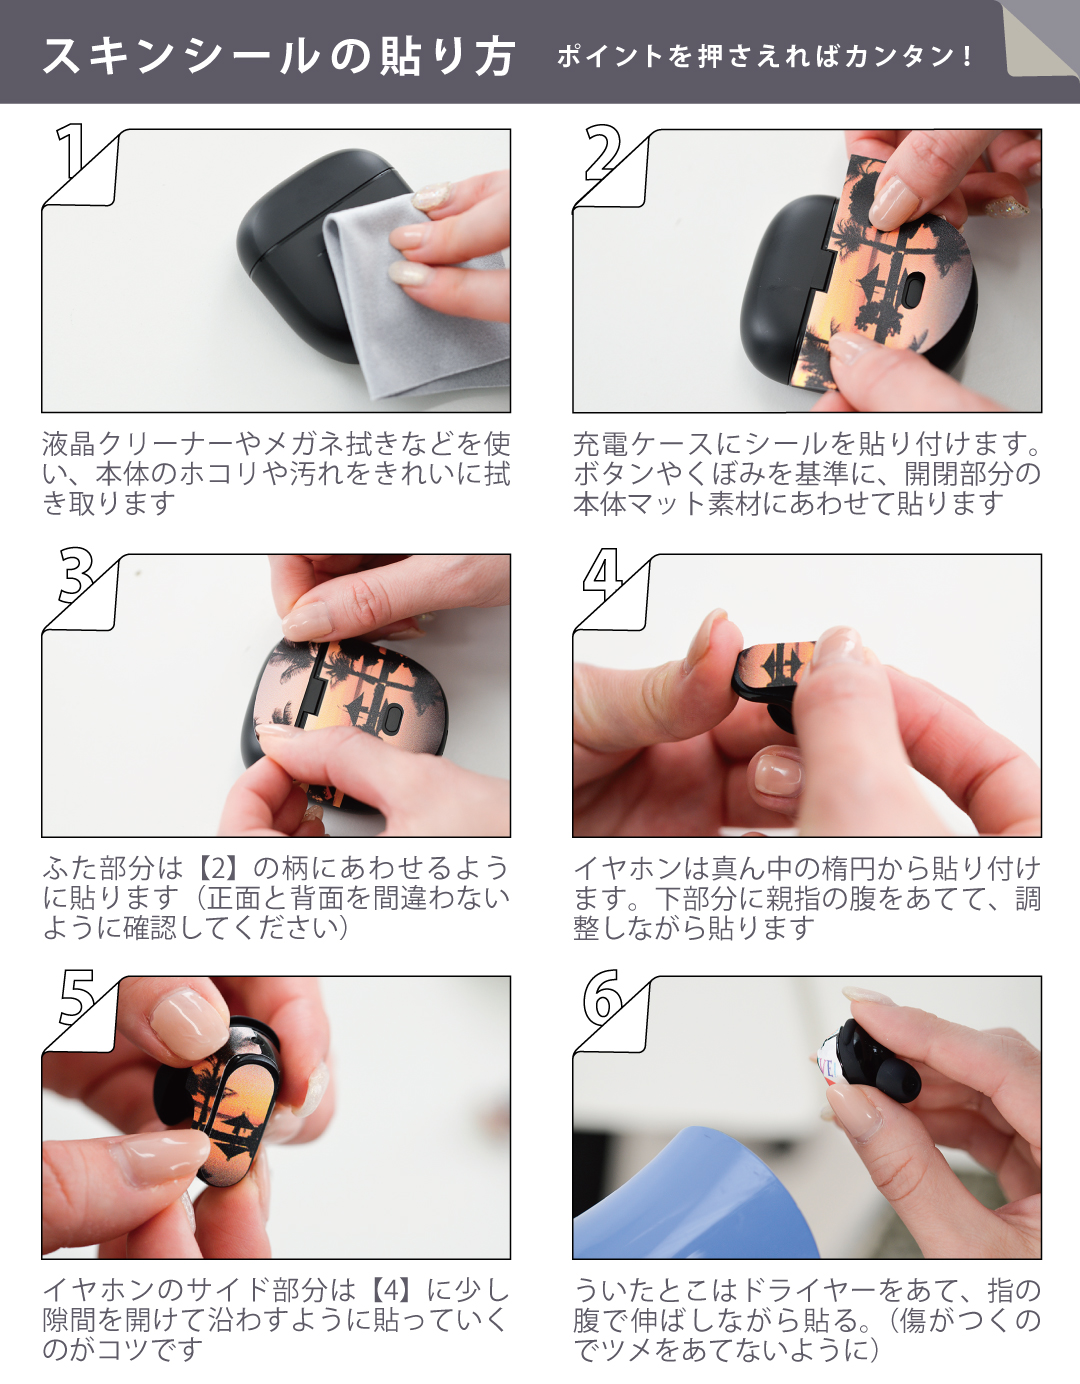 Bose QuietComfort Earbuds II 用 スキンシール ボーズ イヤバッズ2 用 本体3セット ケース1セット 保護 001544  イラスト　